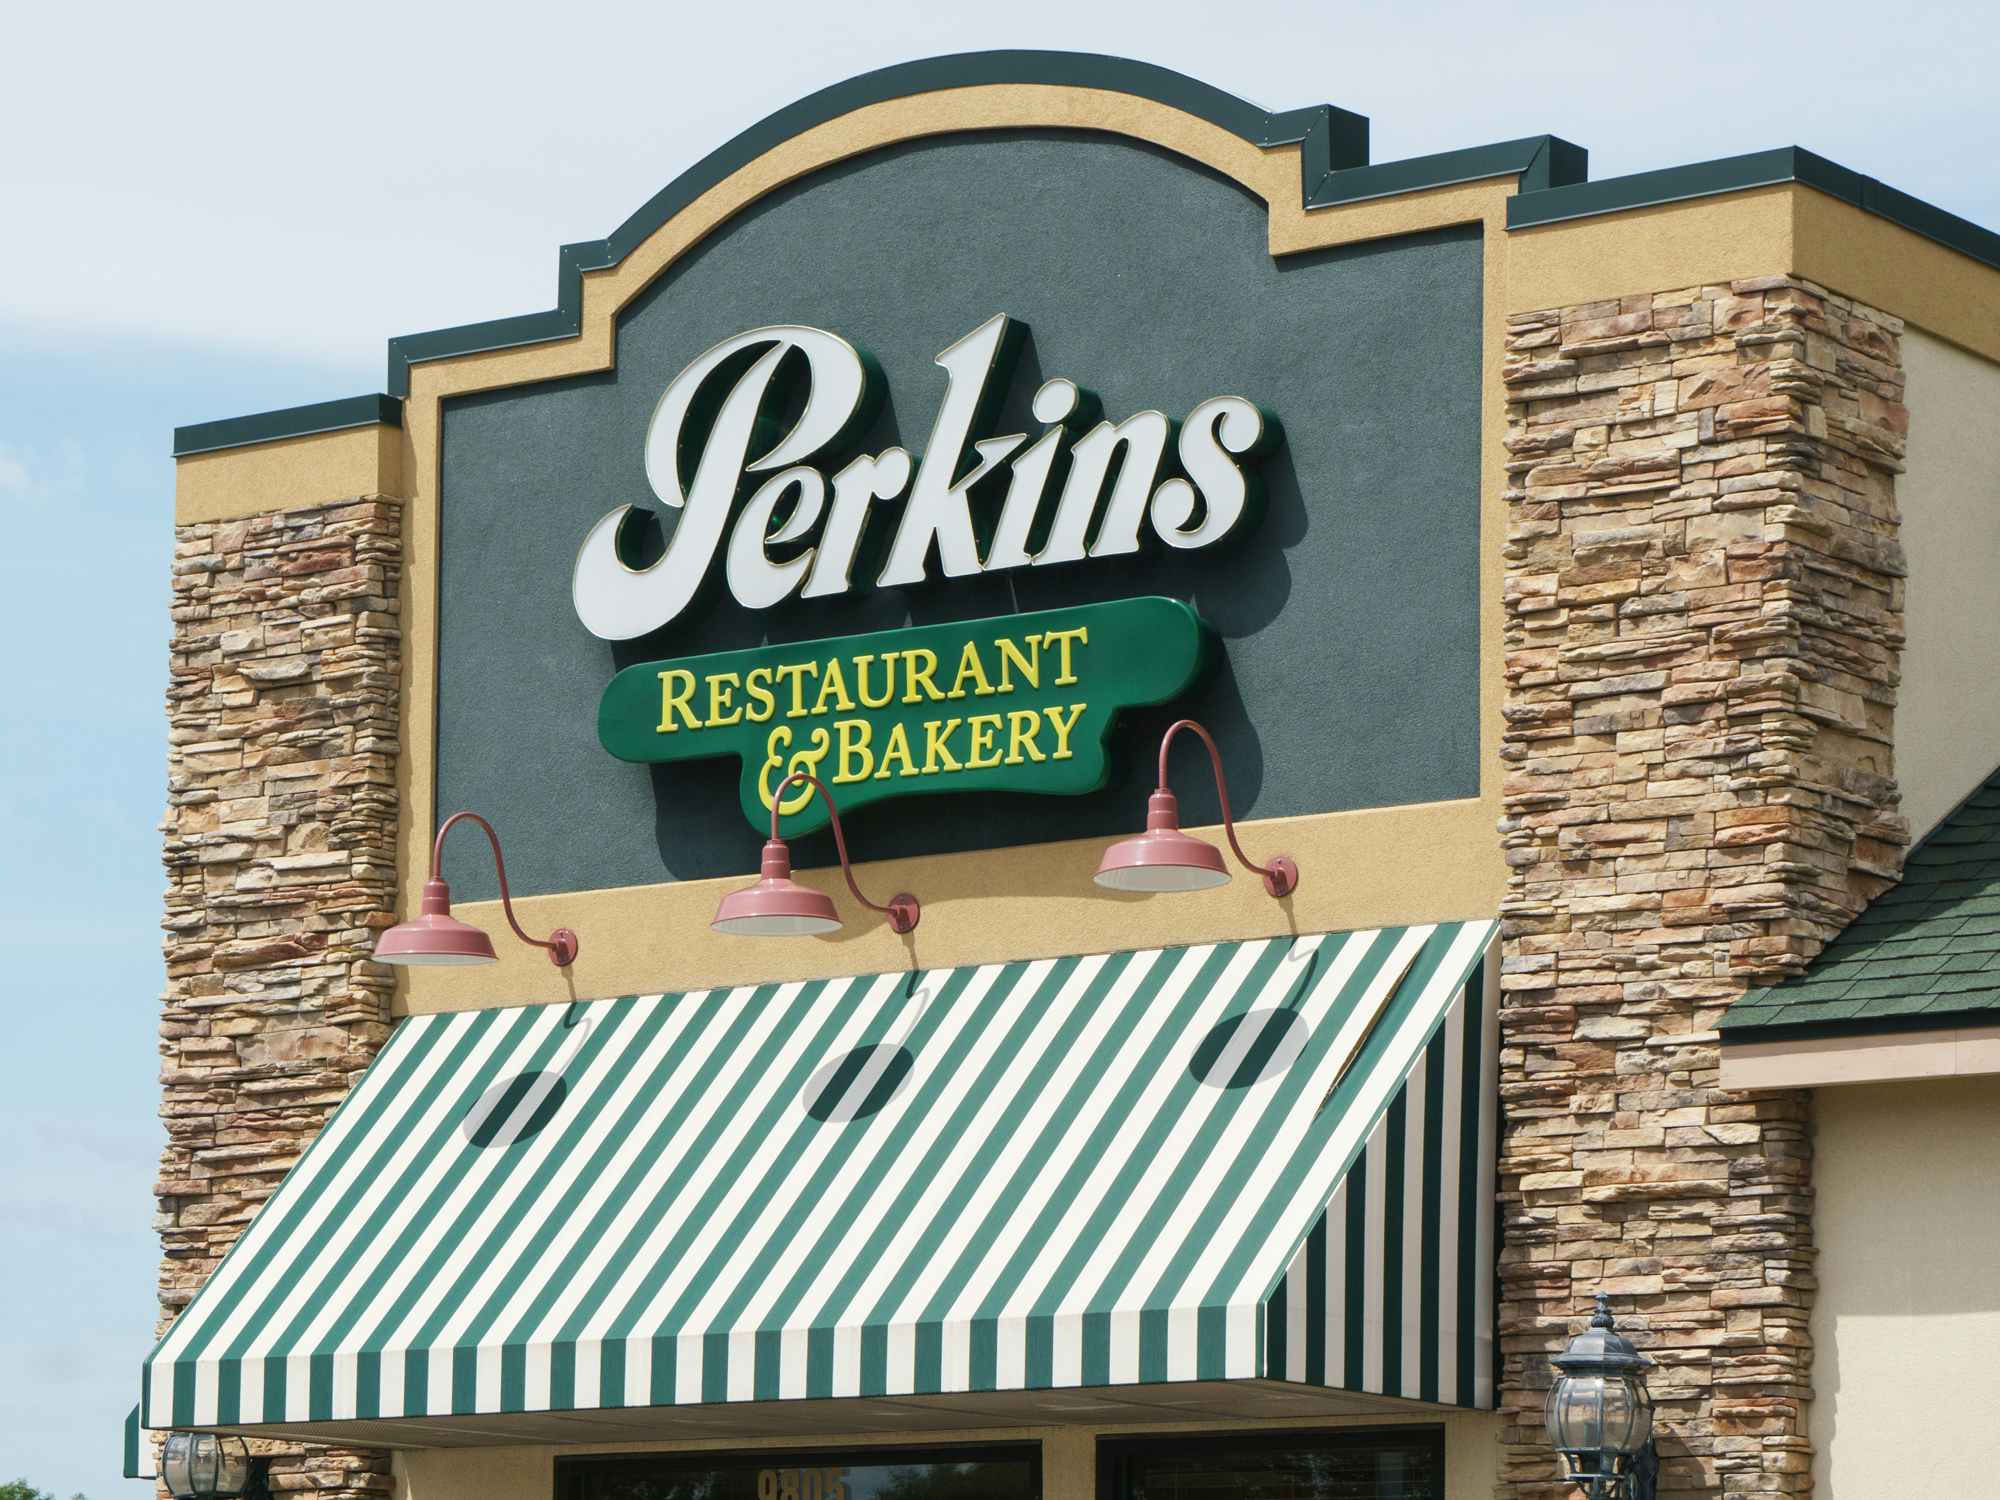 the exterior of Perkins